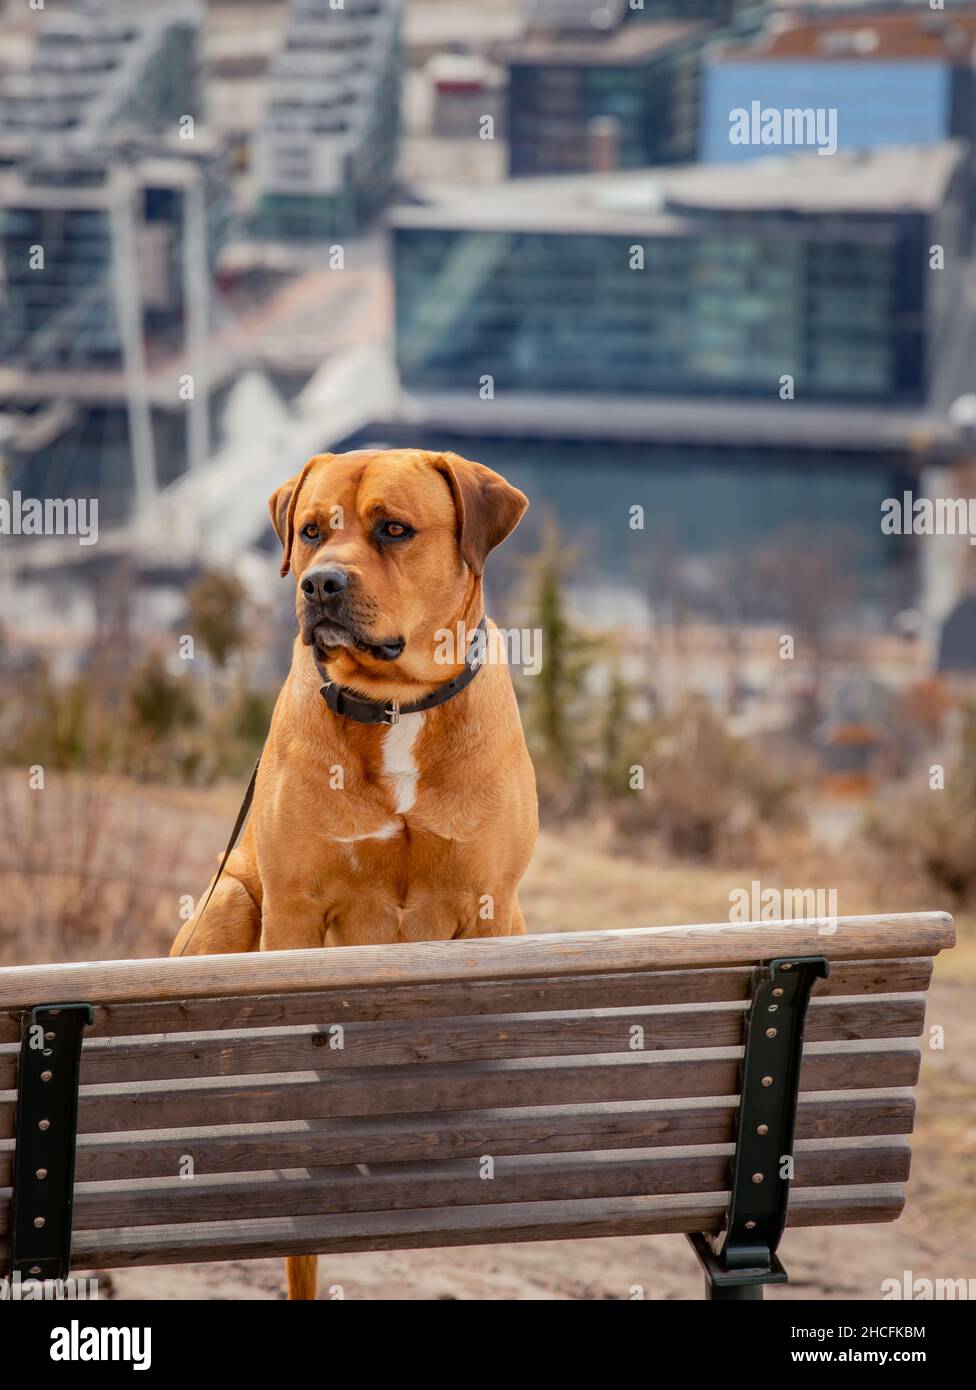 Vertical shot of a Boerboel dog on the bench Stock Photo